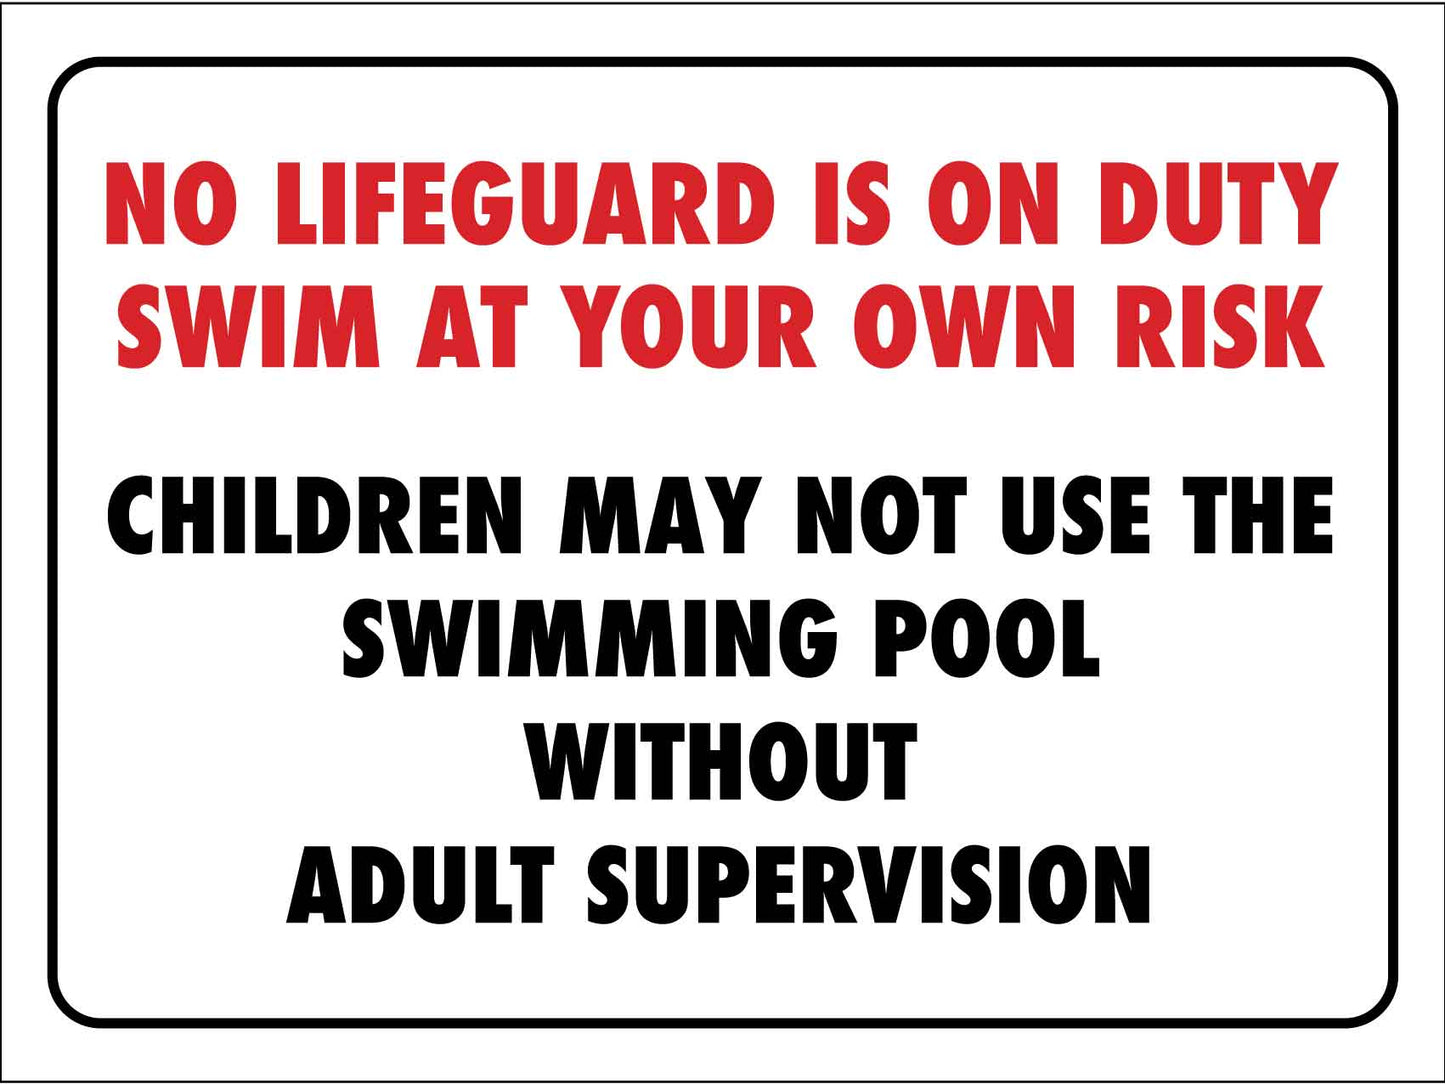 No Lifeguard on Duty Swim at Own Risk Sign